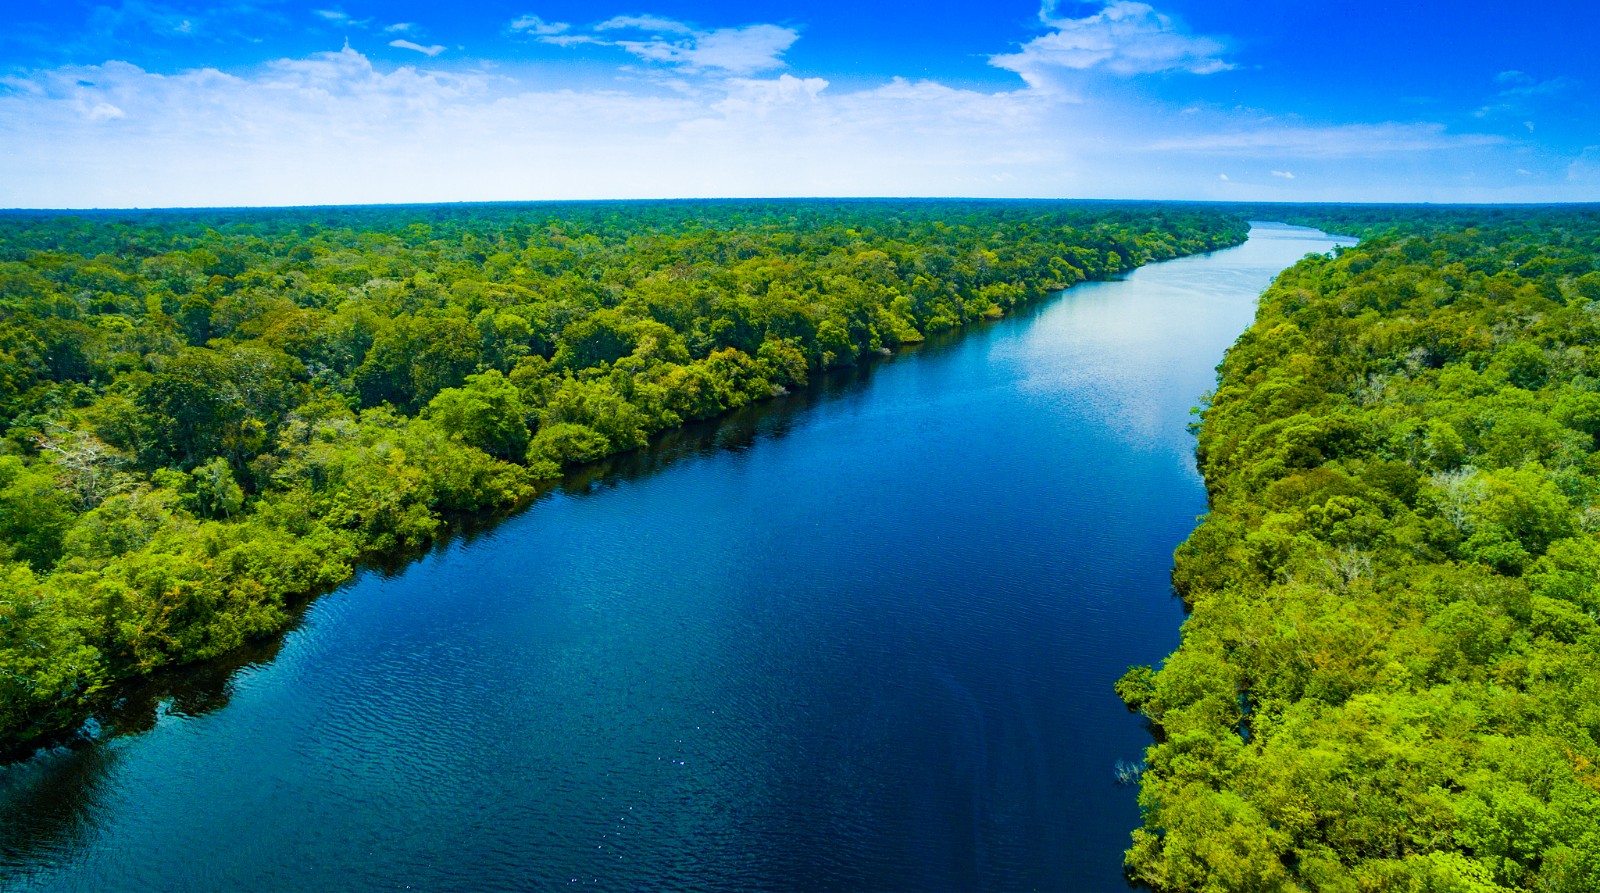 Forests along the Amazon River in Brazil. /CFP